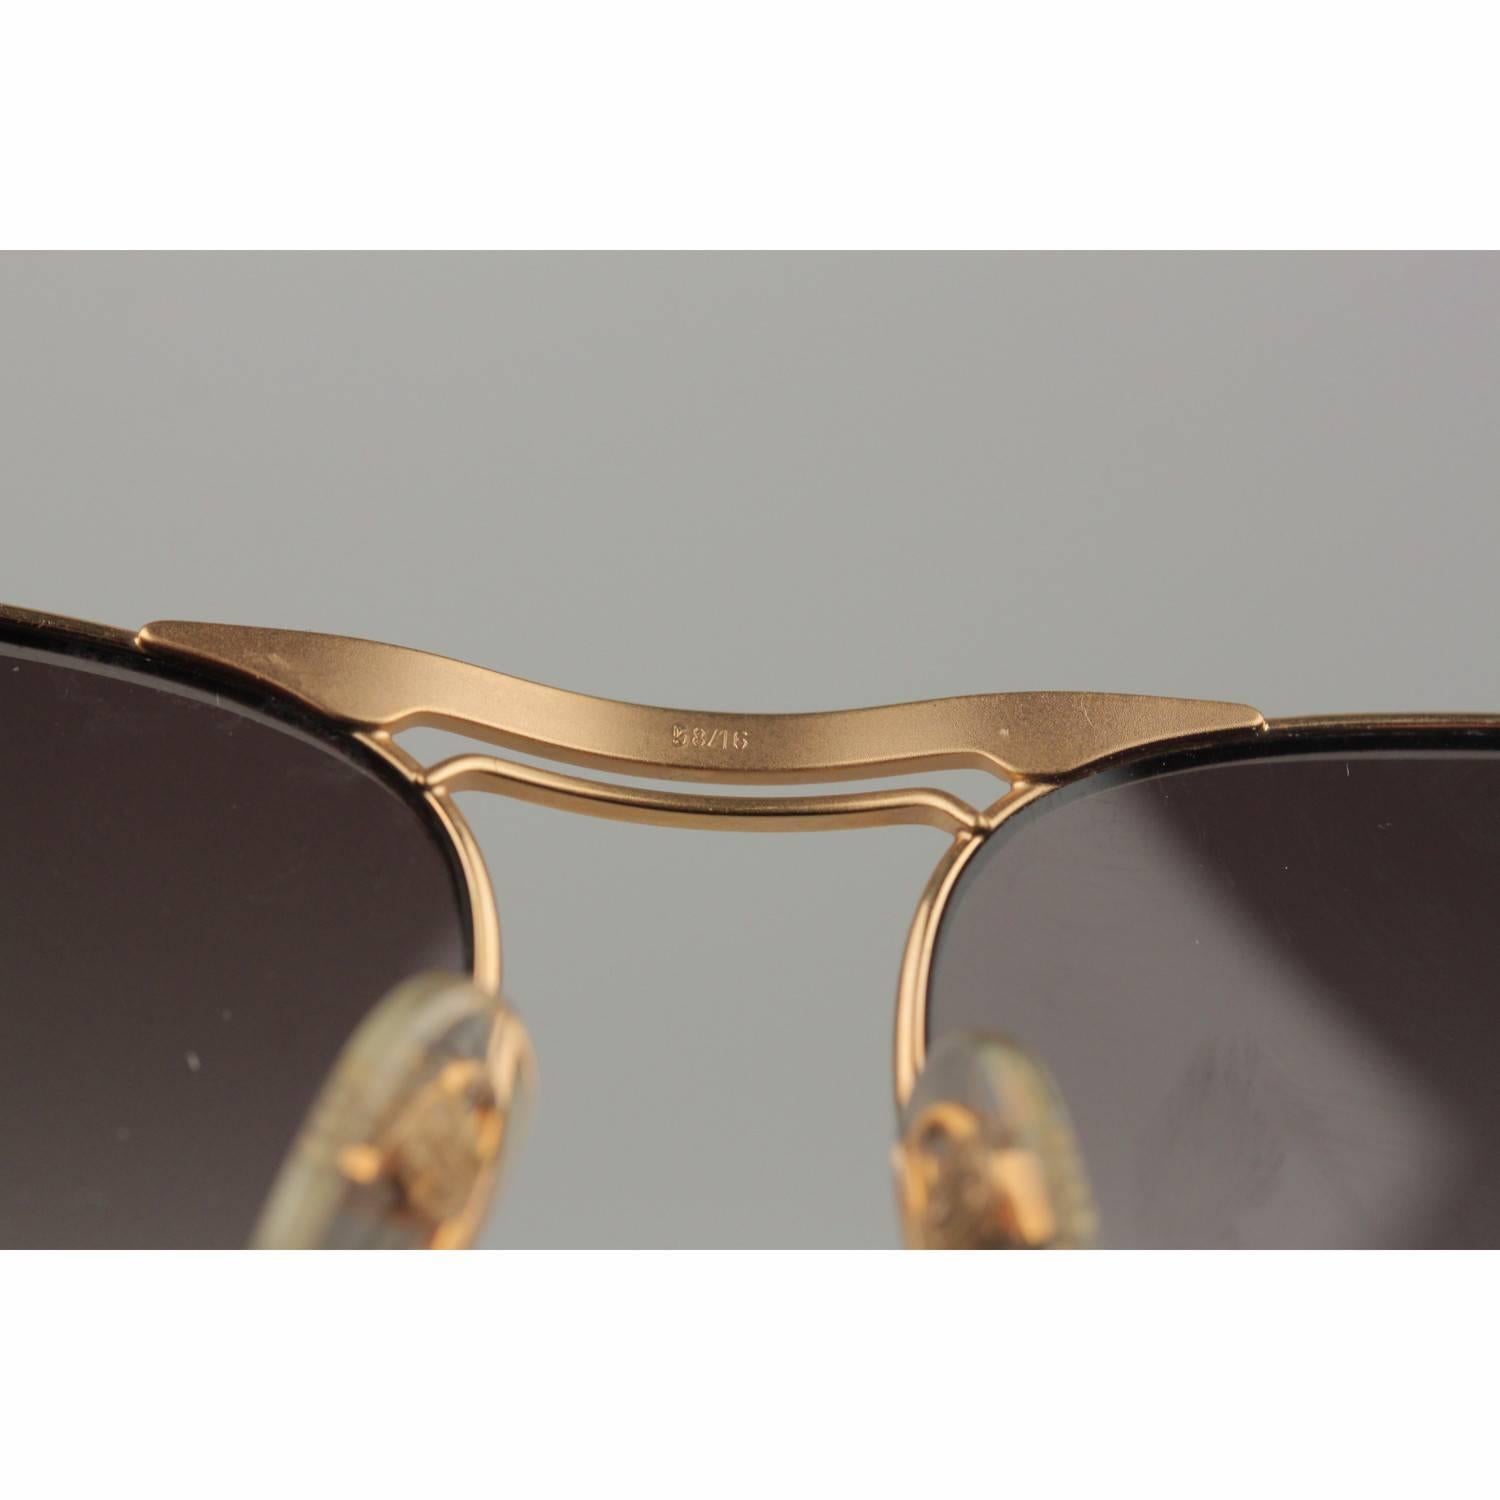 Silhouette Vintage Aviator Gold Metal Sunglasses M7019 58/16 135 mm For Sale 4